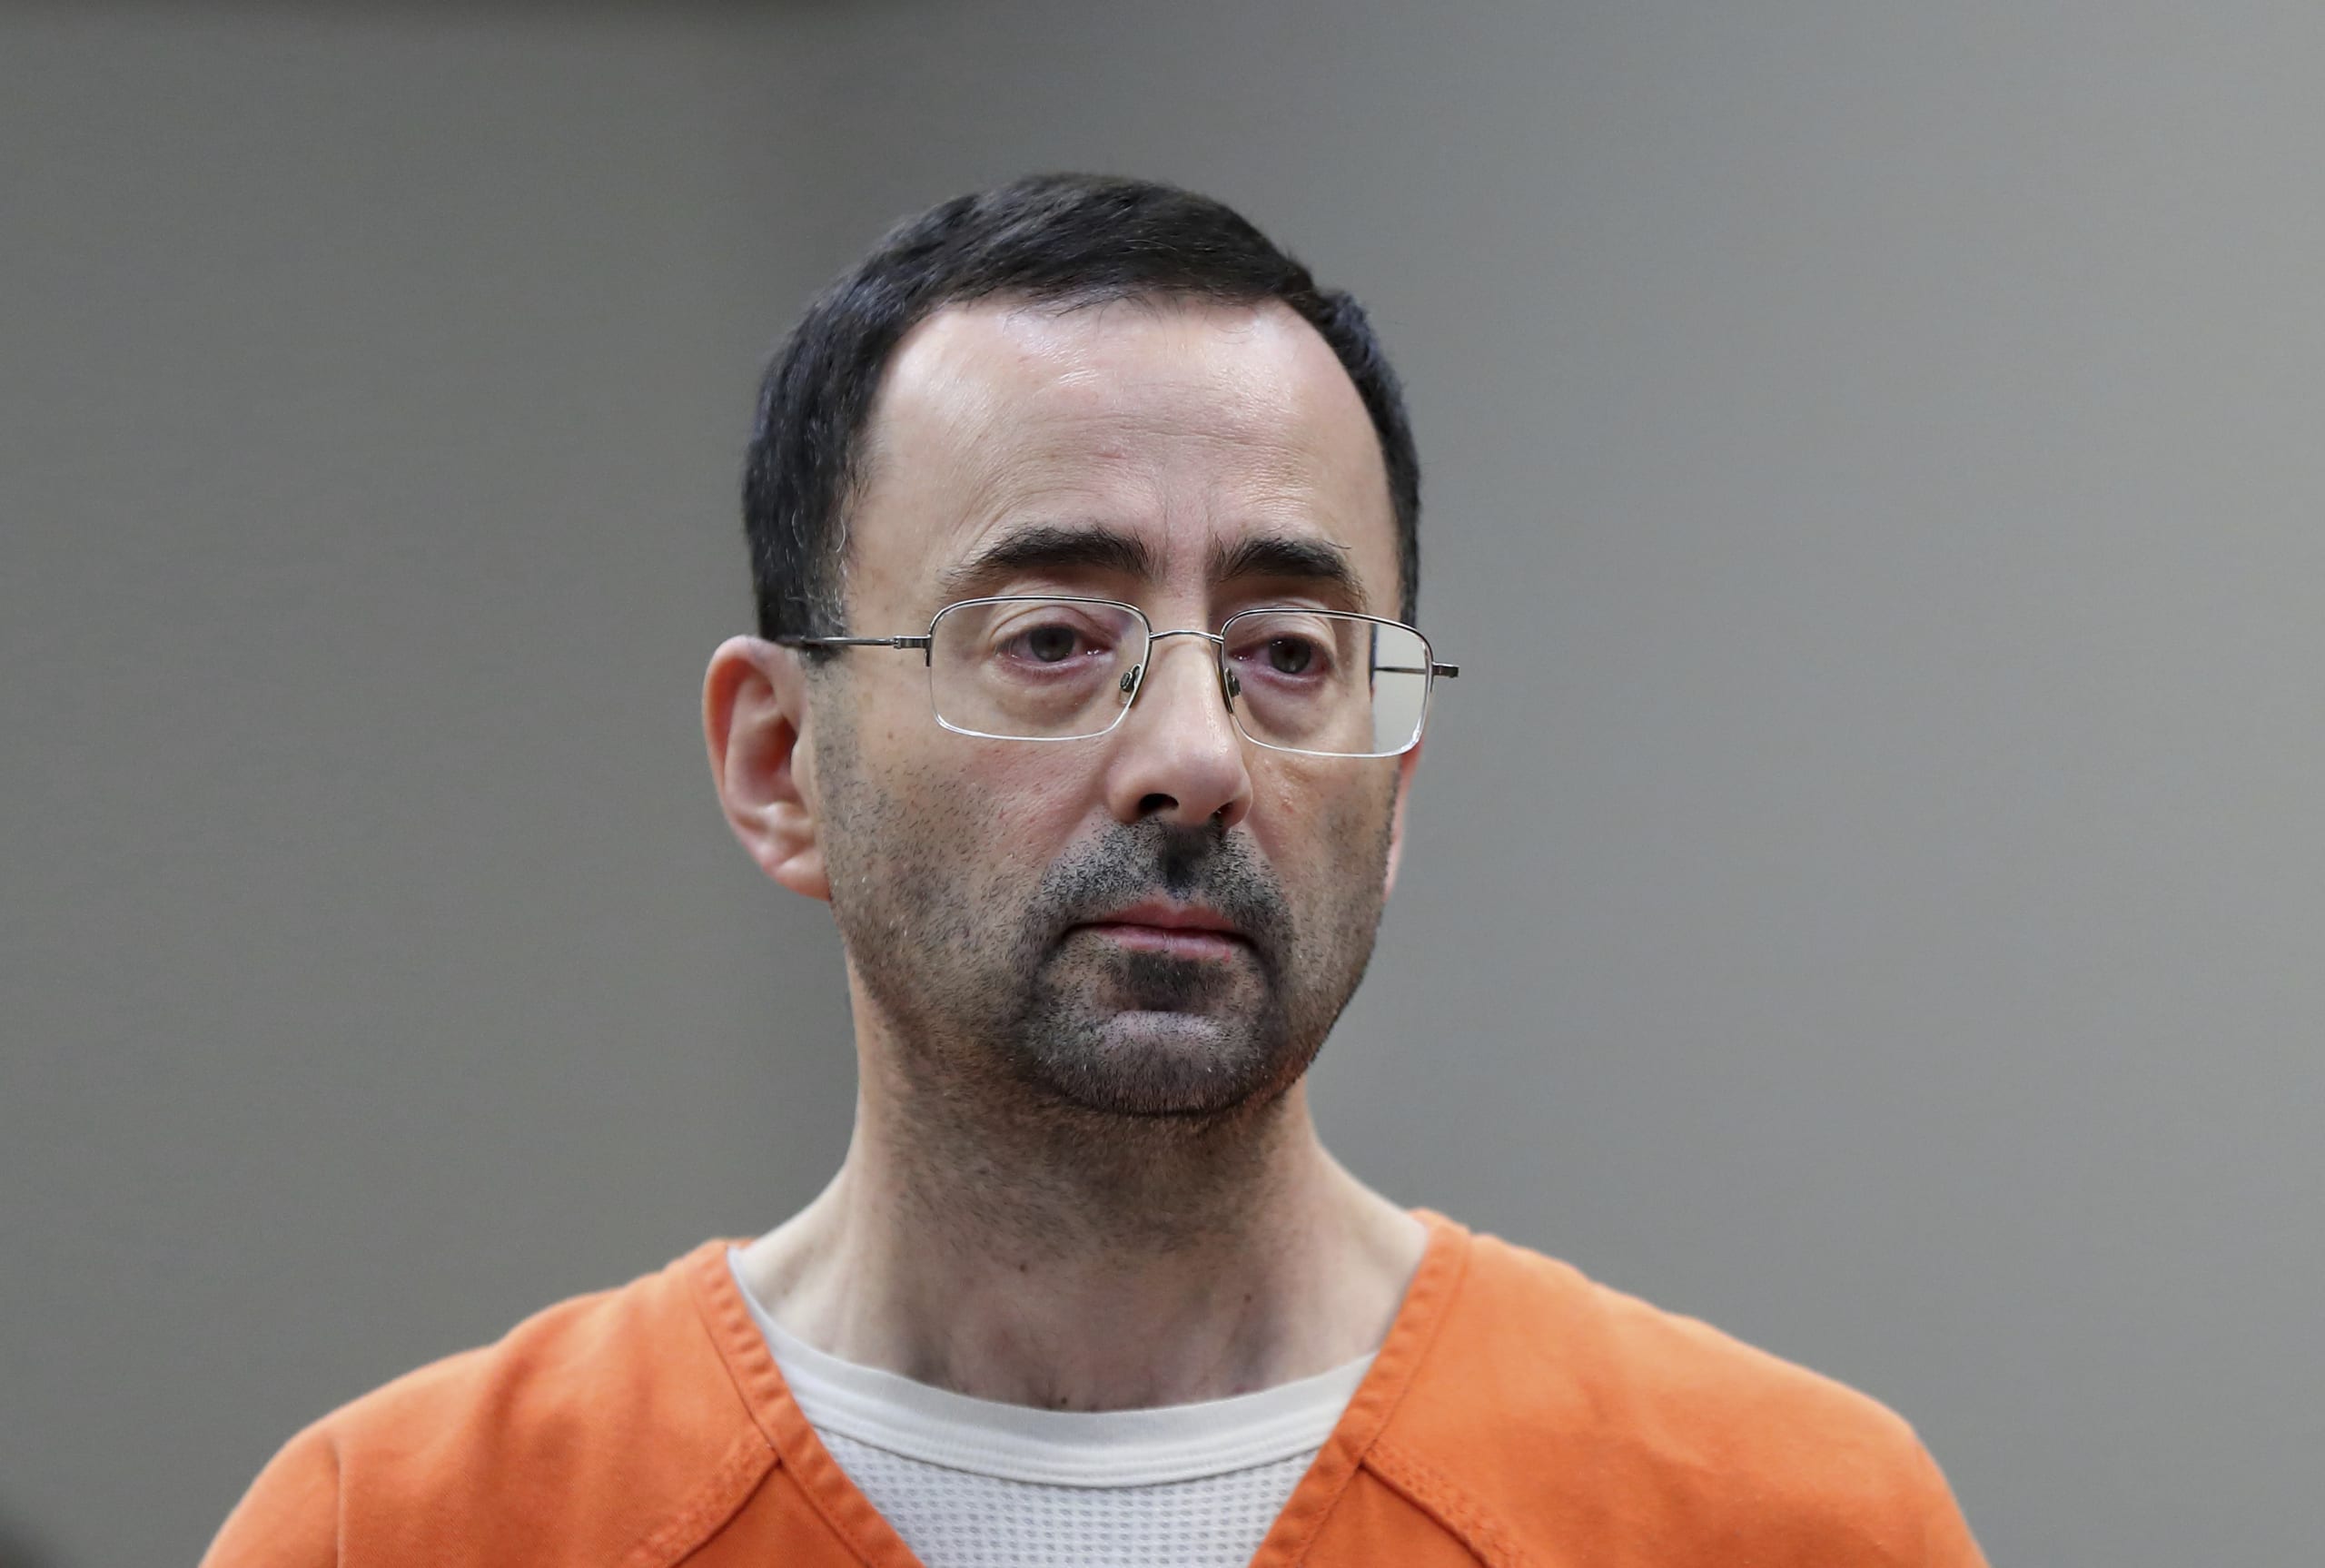 U.S. to pay $138M to Larry Nassar victims, who include Simone Biles and Aly Raisman